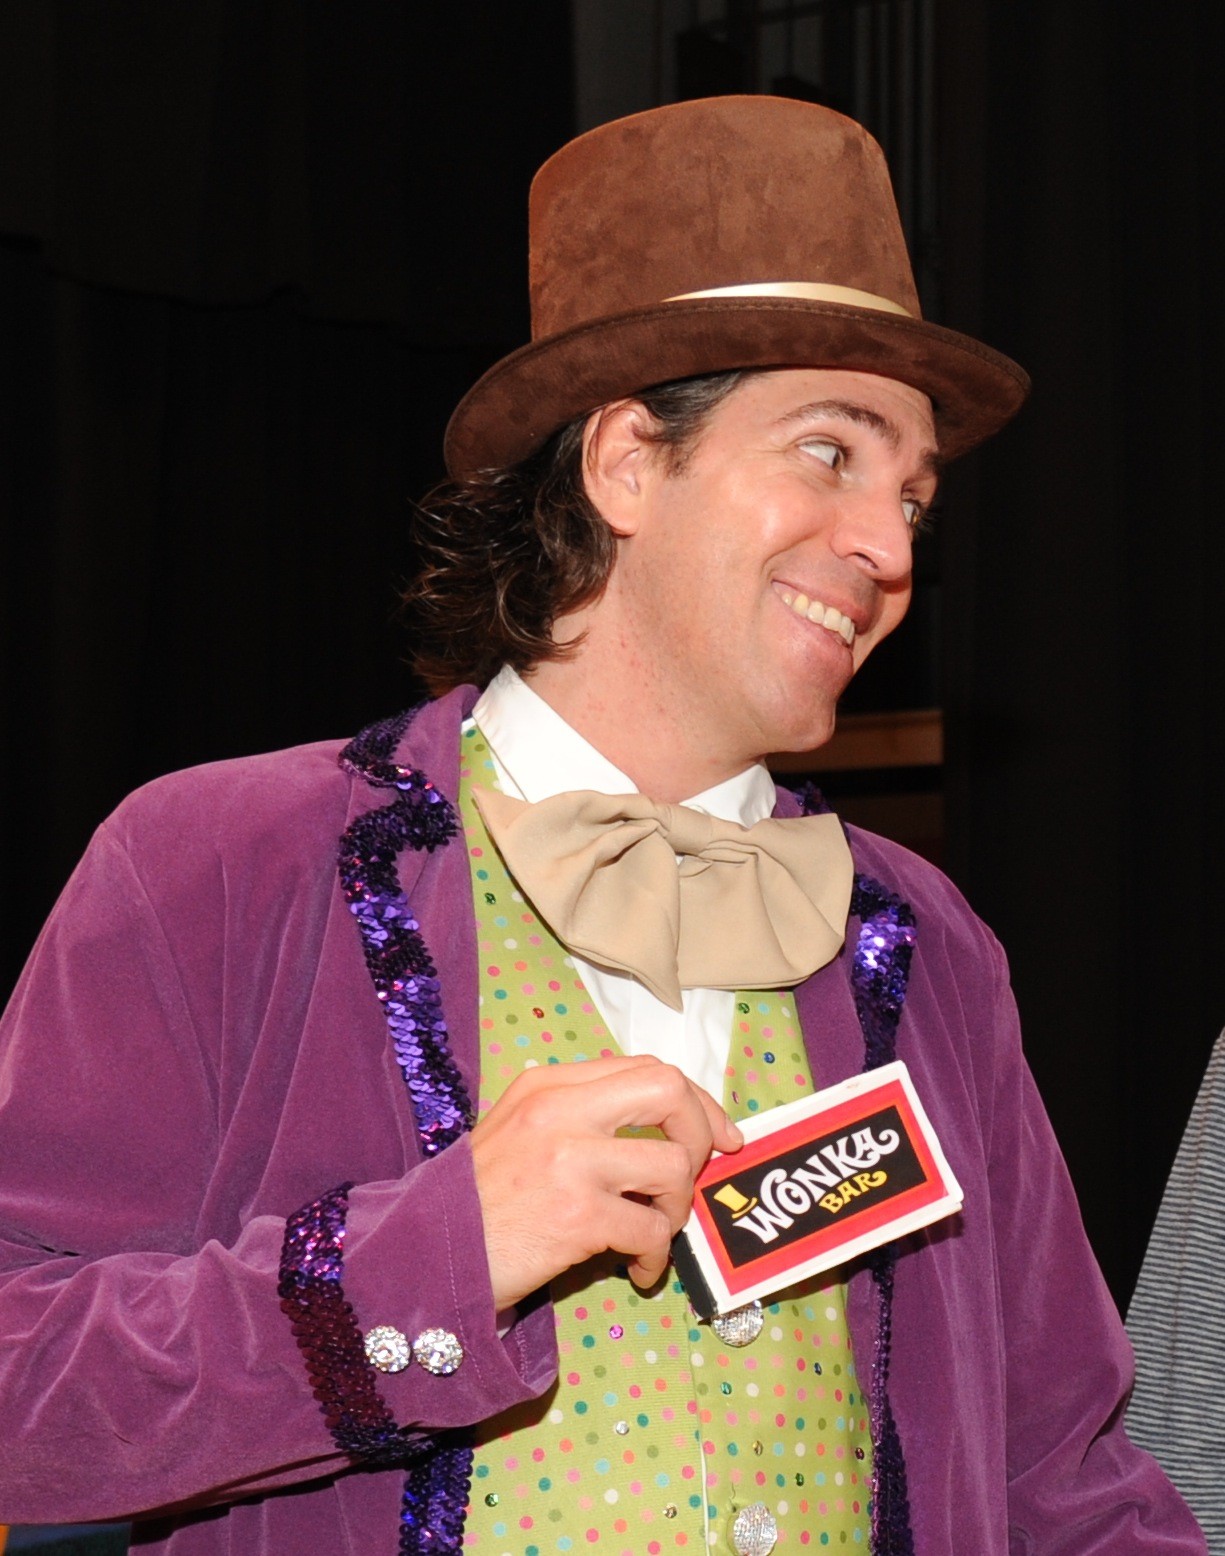 Willie wonka is played by Sal Canepa of Oceanside.